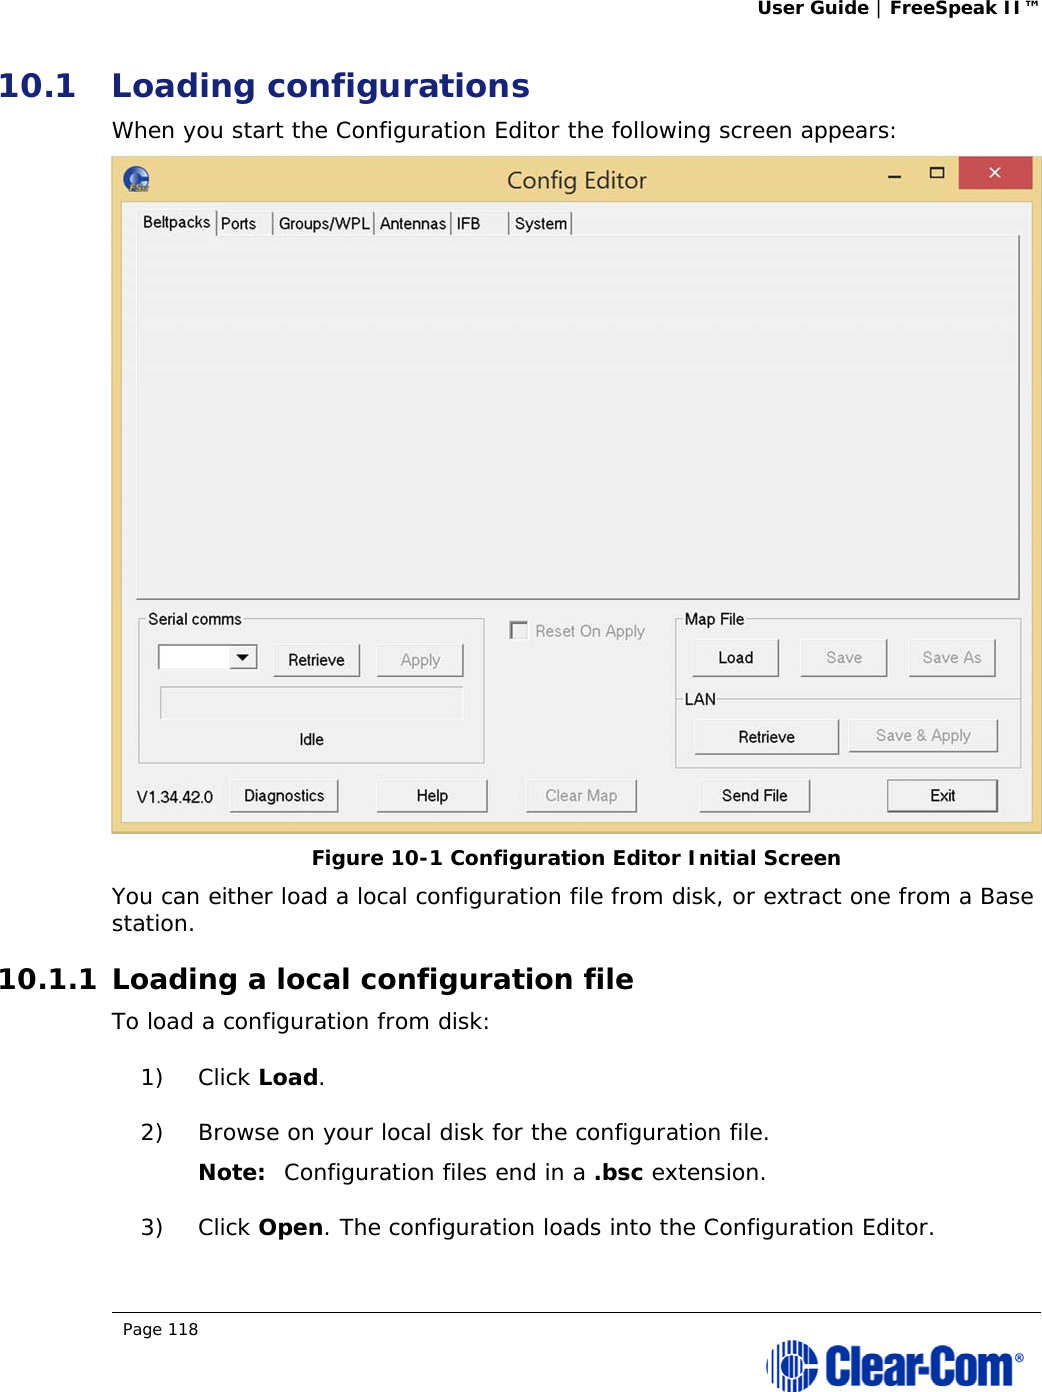 User Guide | FreeSpeak II™  Page 118  10.1 Loading configurations  When you start the Configuration Editor the following screen appears:  Figure 10-1 Configuration Editor Initial Screen You can either load a local configuration file from disk, or extract one from a Base station. 10.1.1 Loading a local configuration file To load a configuration from disk: 1) Click Load. 2) Browse on your local disk for the configuration file.  Note: Configuration files end in a .bsc extension. 3) Click Open. The configuration loads into the Configuration Editor. 